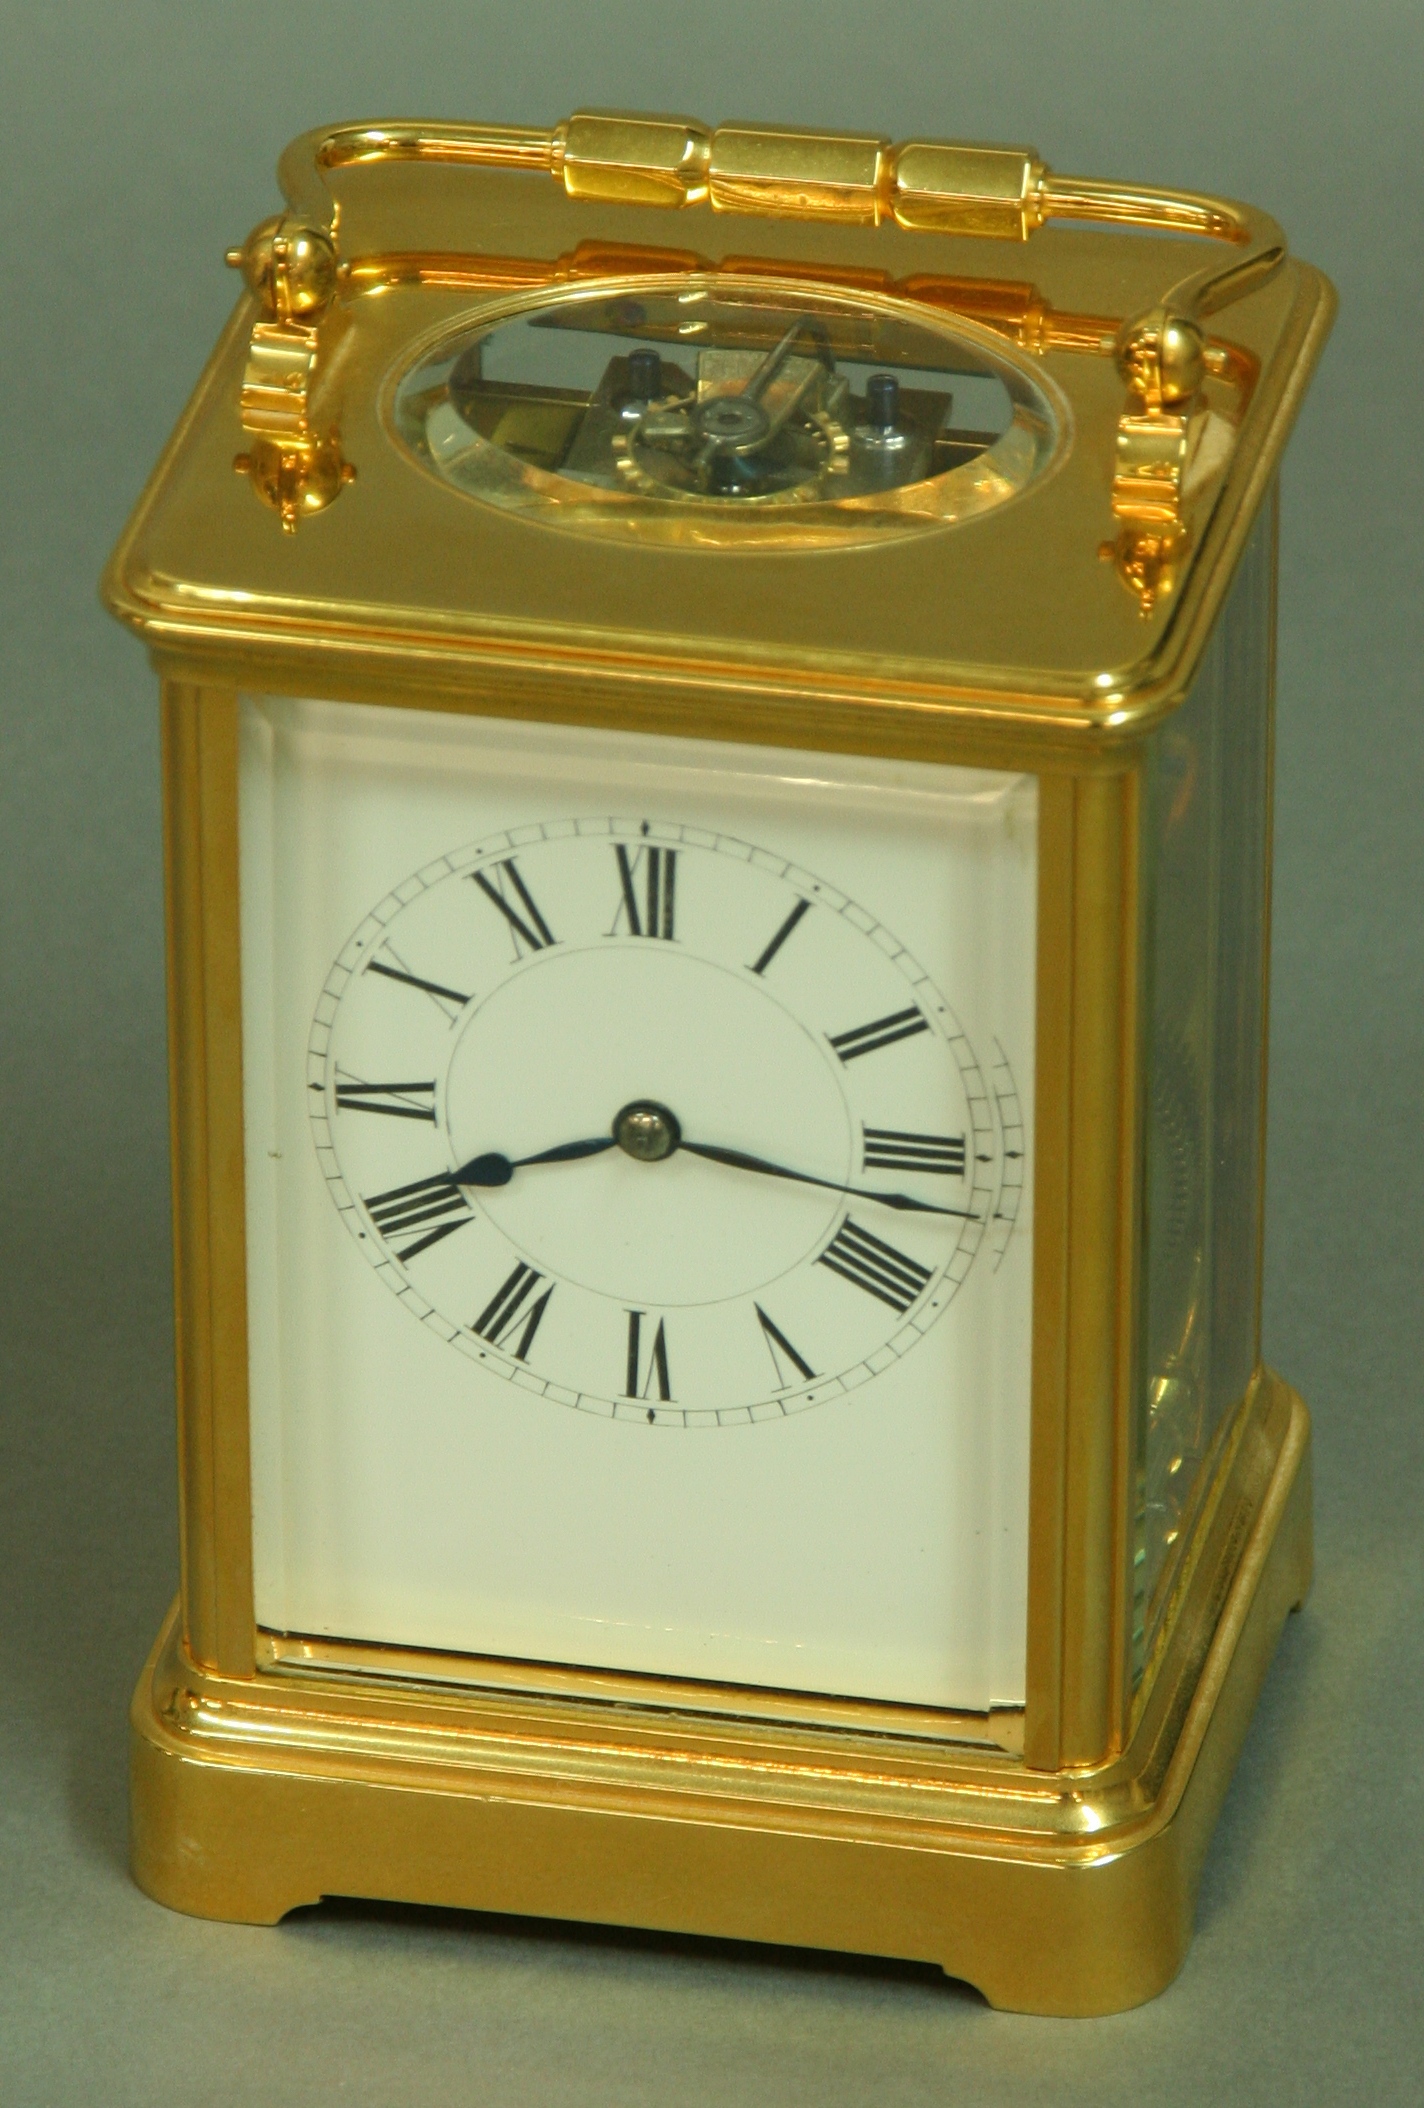 A FRENCH GILT BRASS FOUR PANE CARRIAGE CLOCK, late 19th century, white enamel dial, eight day